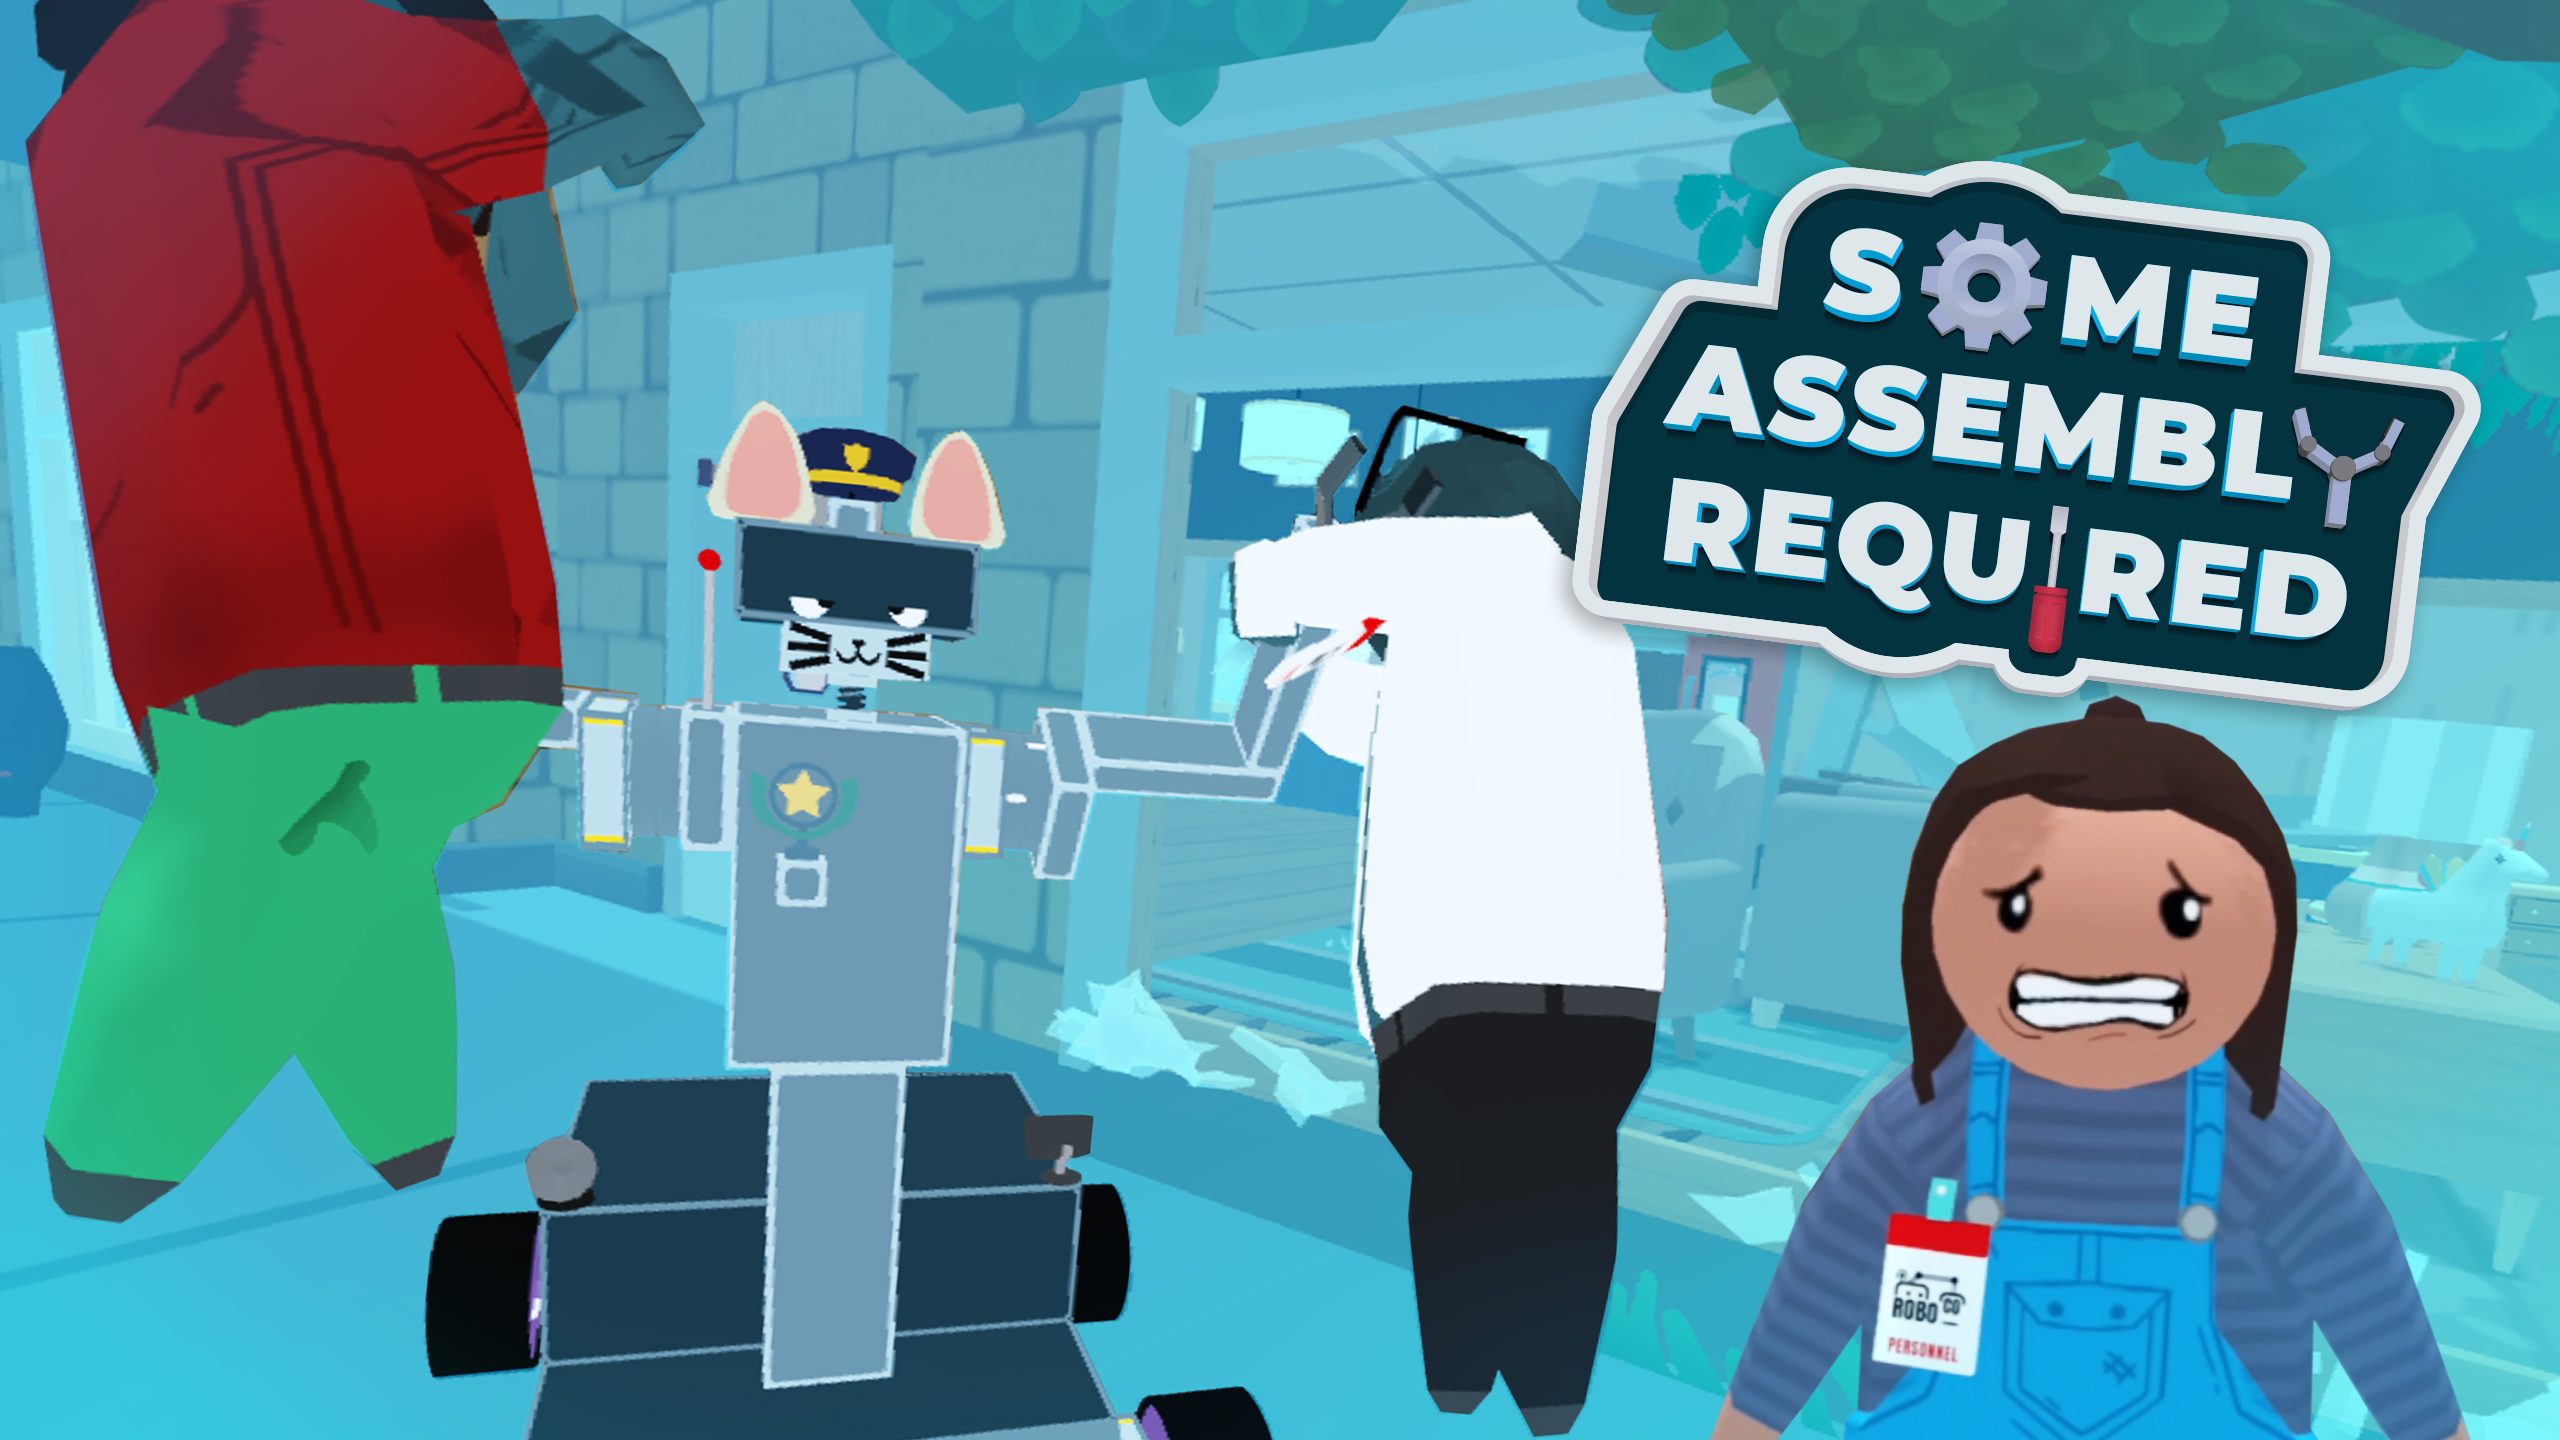 Build Robots, Help Humans, and Cause Chaos in Some Assembly Required